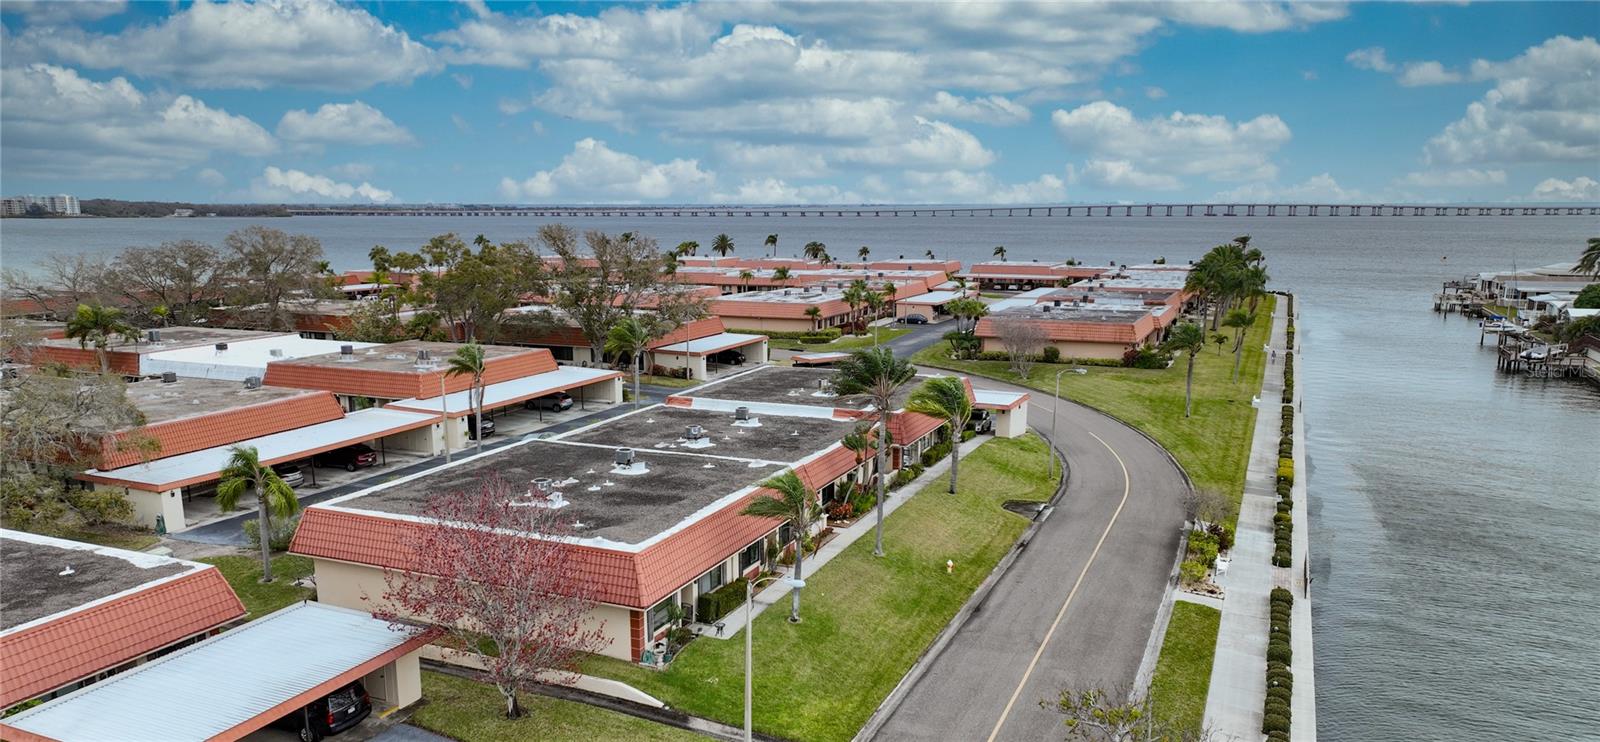 Aerial views of building 21, canal, bay and walkway around the community.